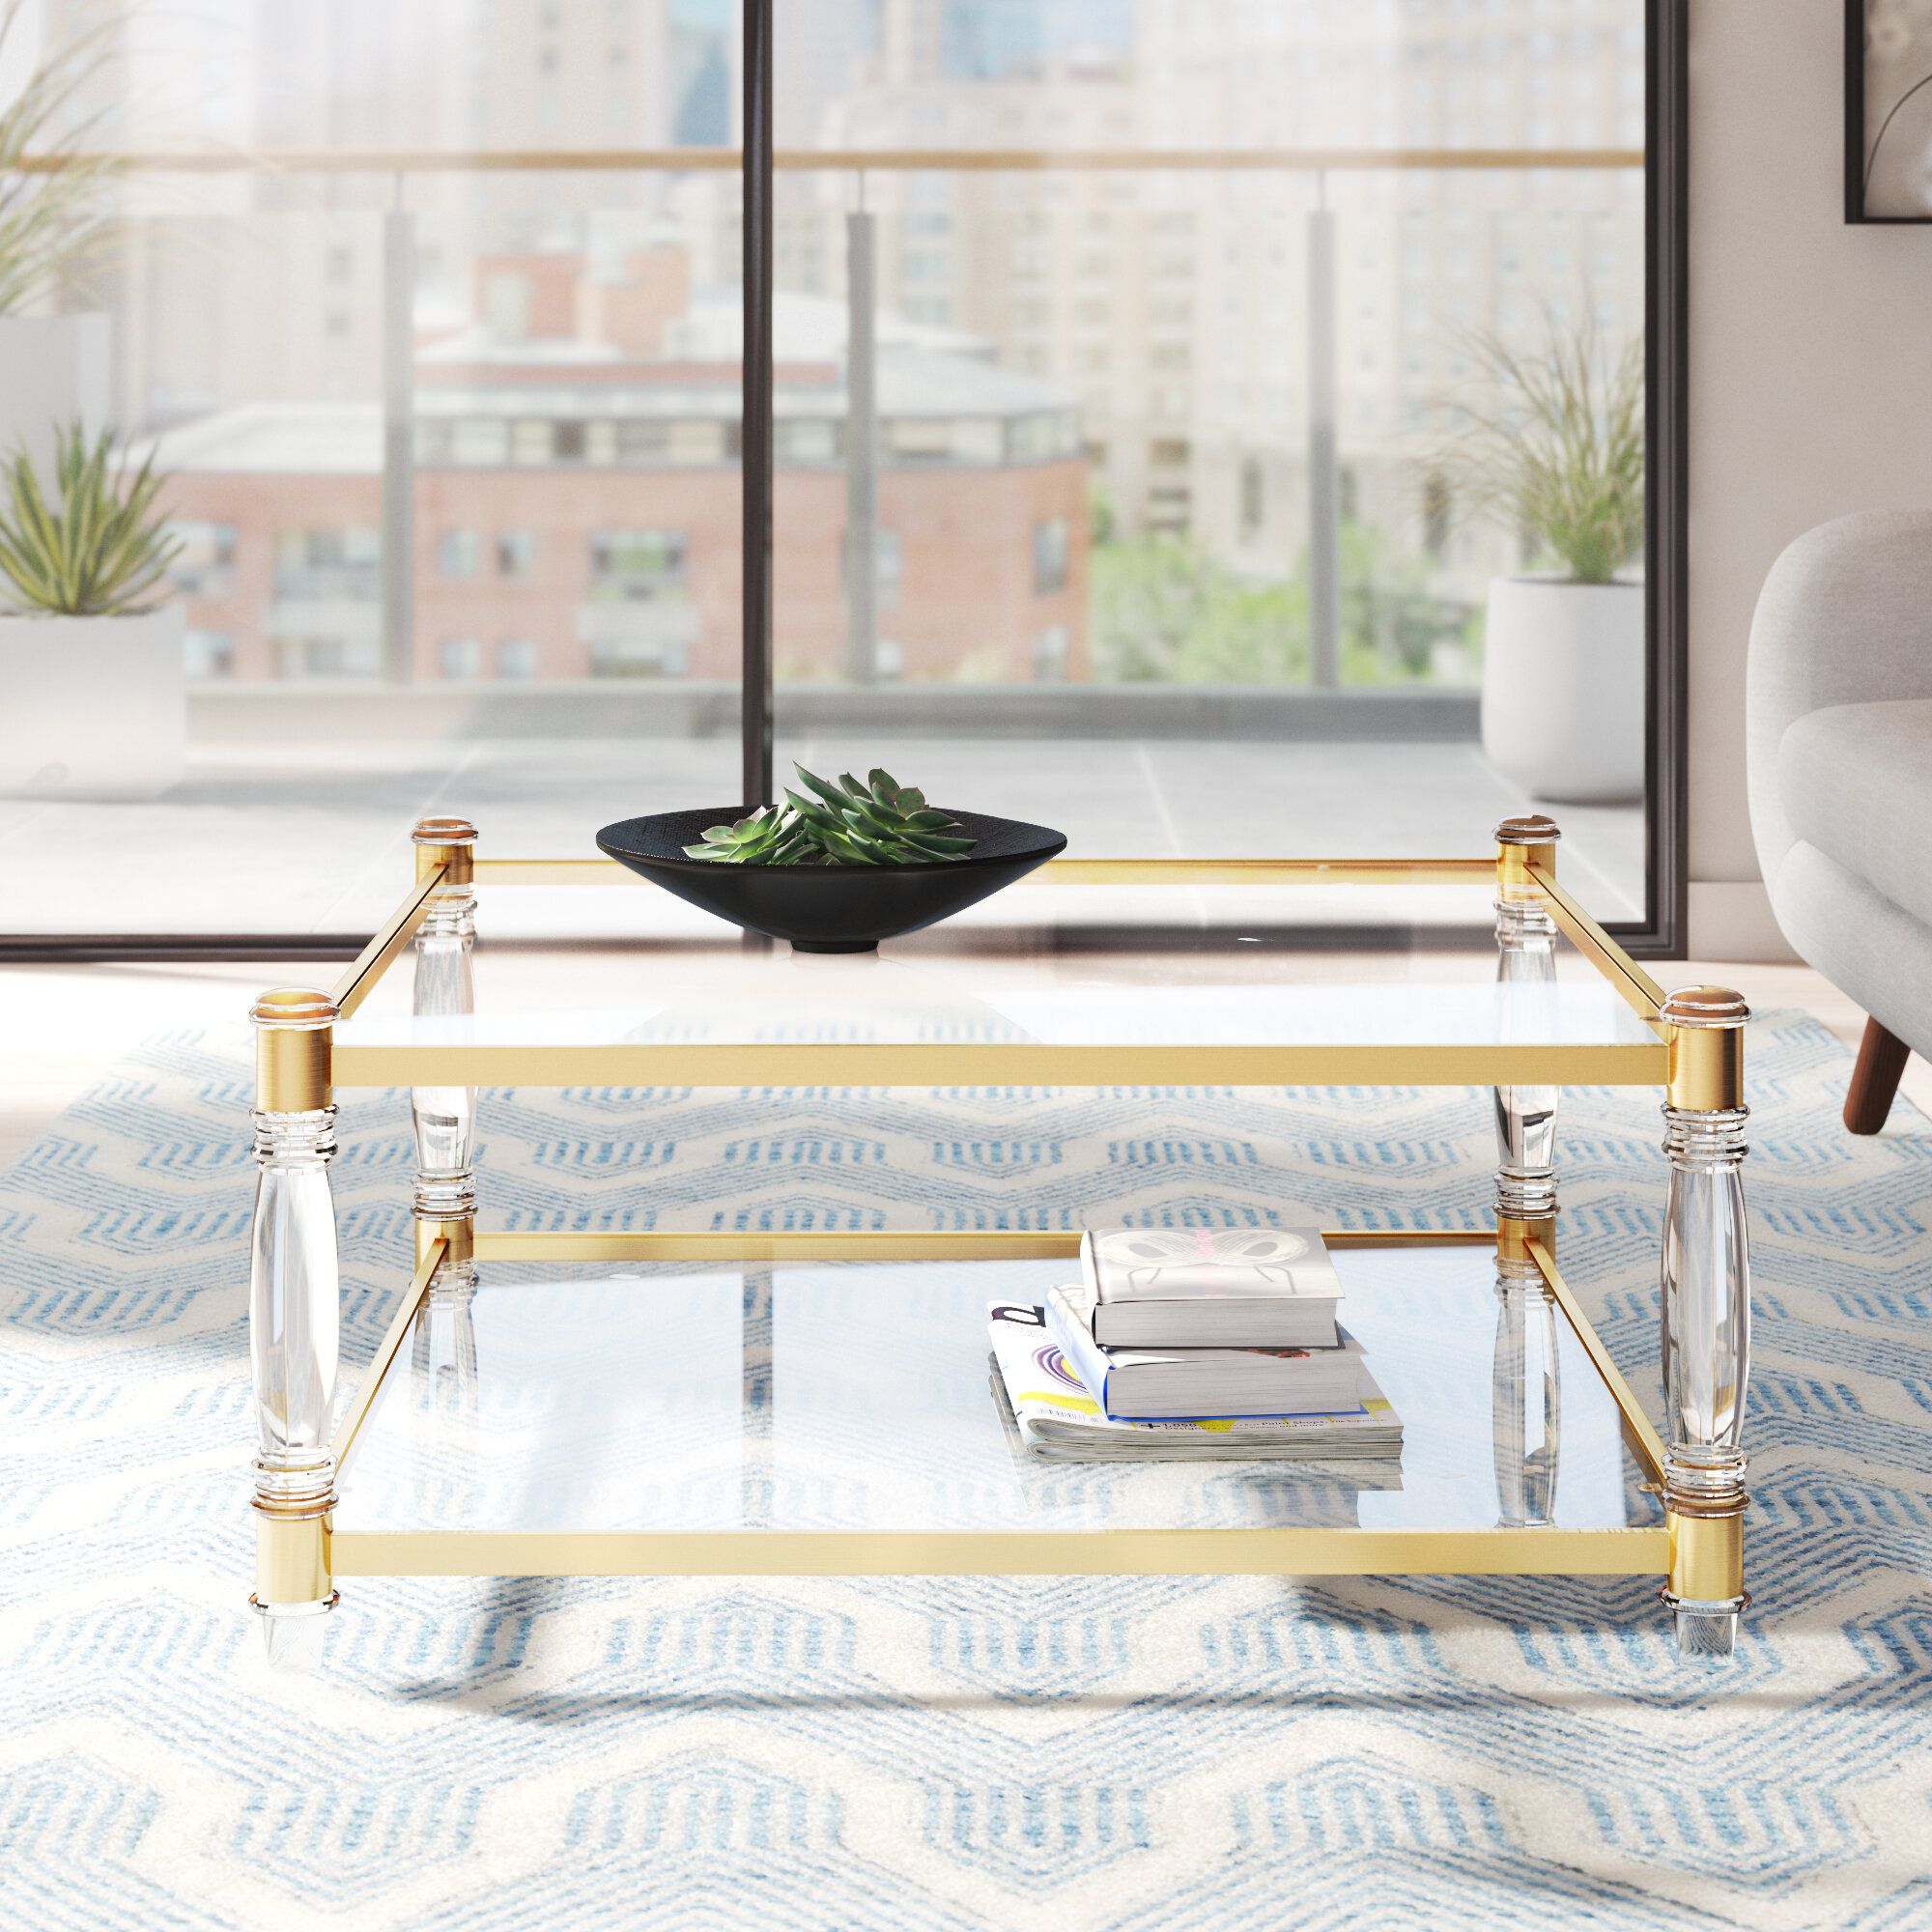 Mercer41 Brahm 4 Legs Coffee Table With Storage & Reviews | Wayfair Within Stainless Steel And Acrylic Coffee Tables (View 7 of 20)